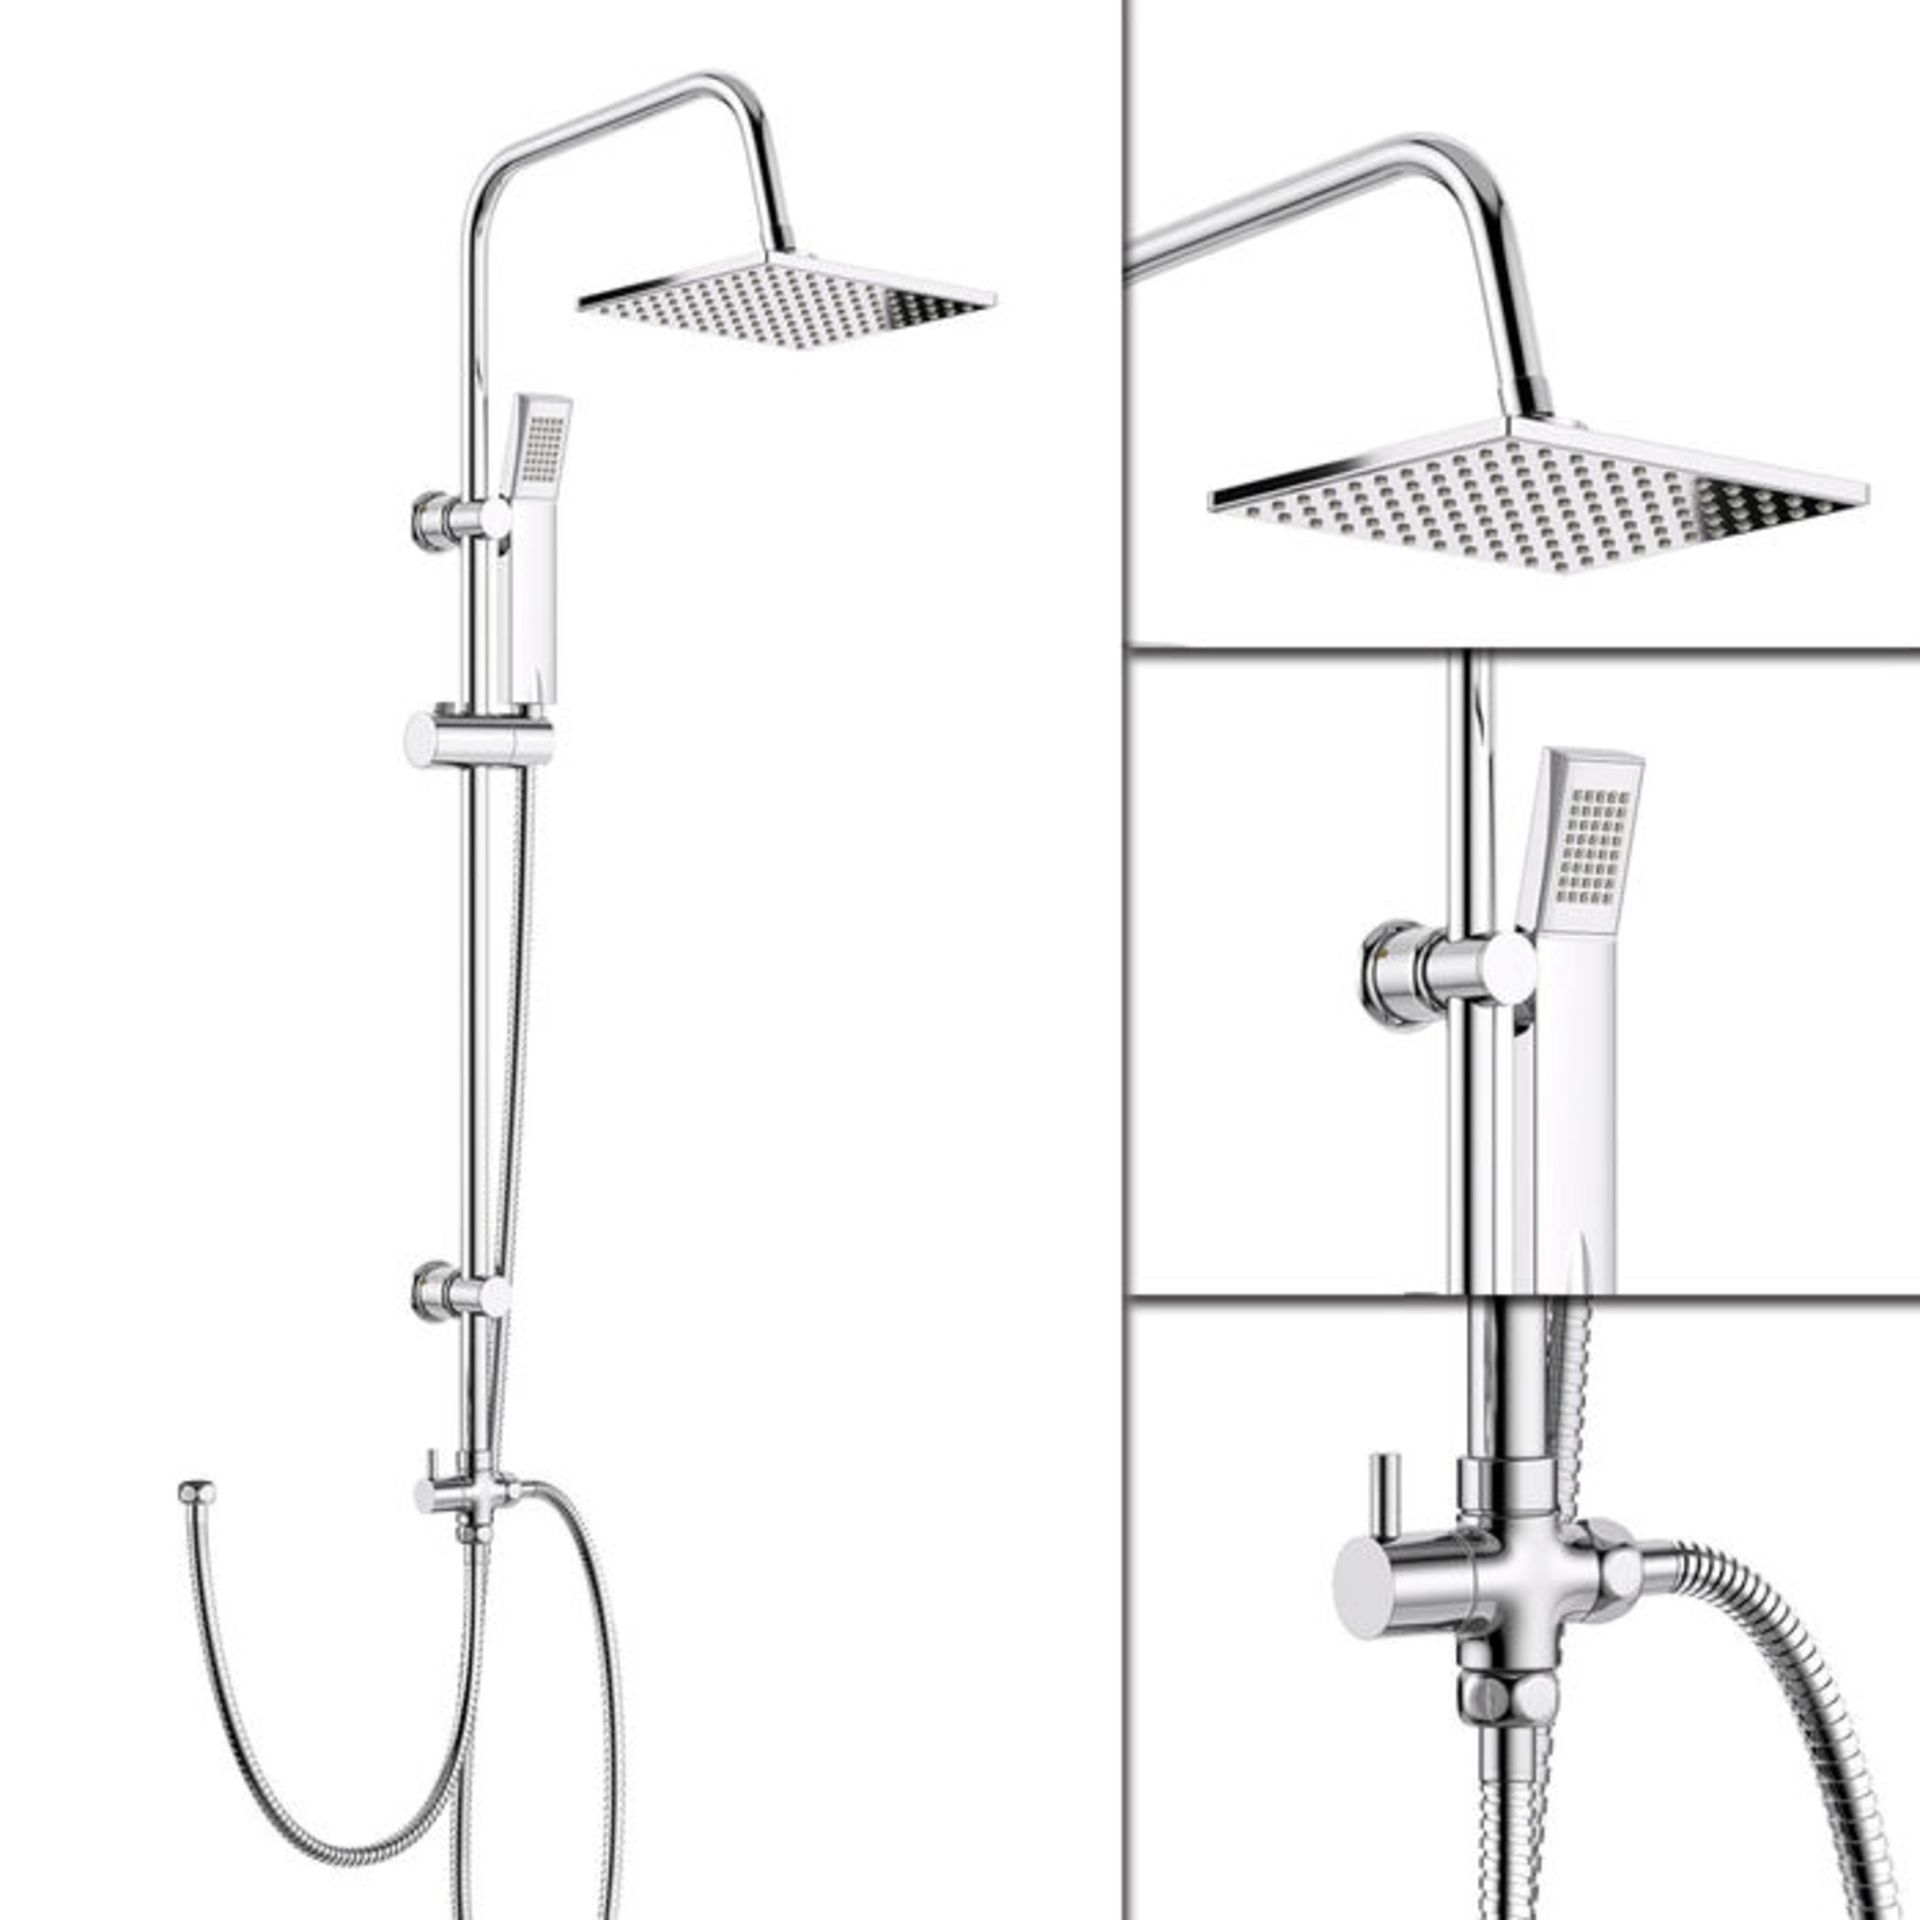 200mm Square Head, Riser Rail & Handheld Kit Quality stainless steel shower head with Easy Cle... - Image 4 of 4